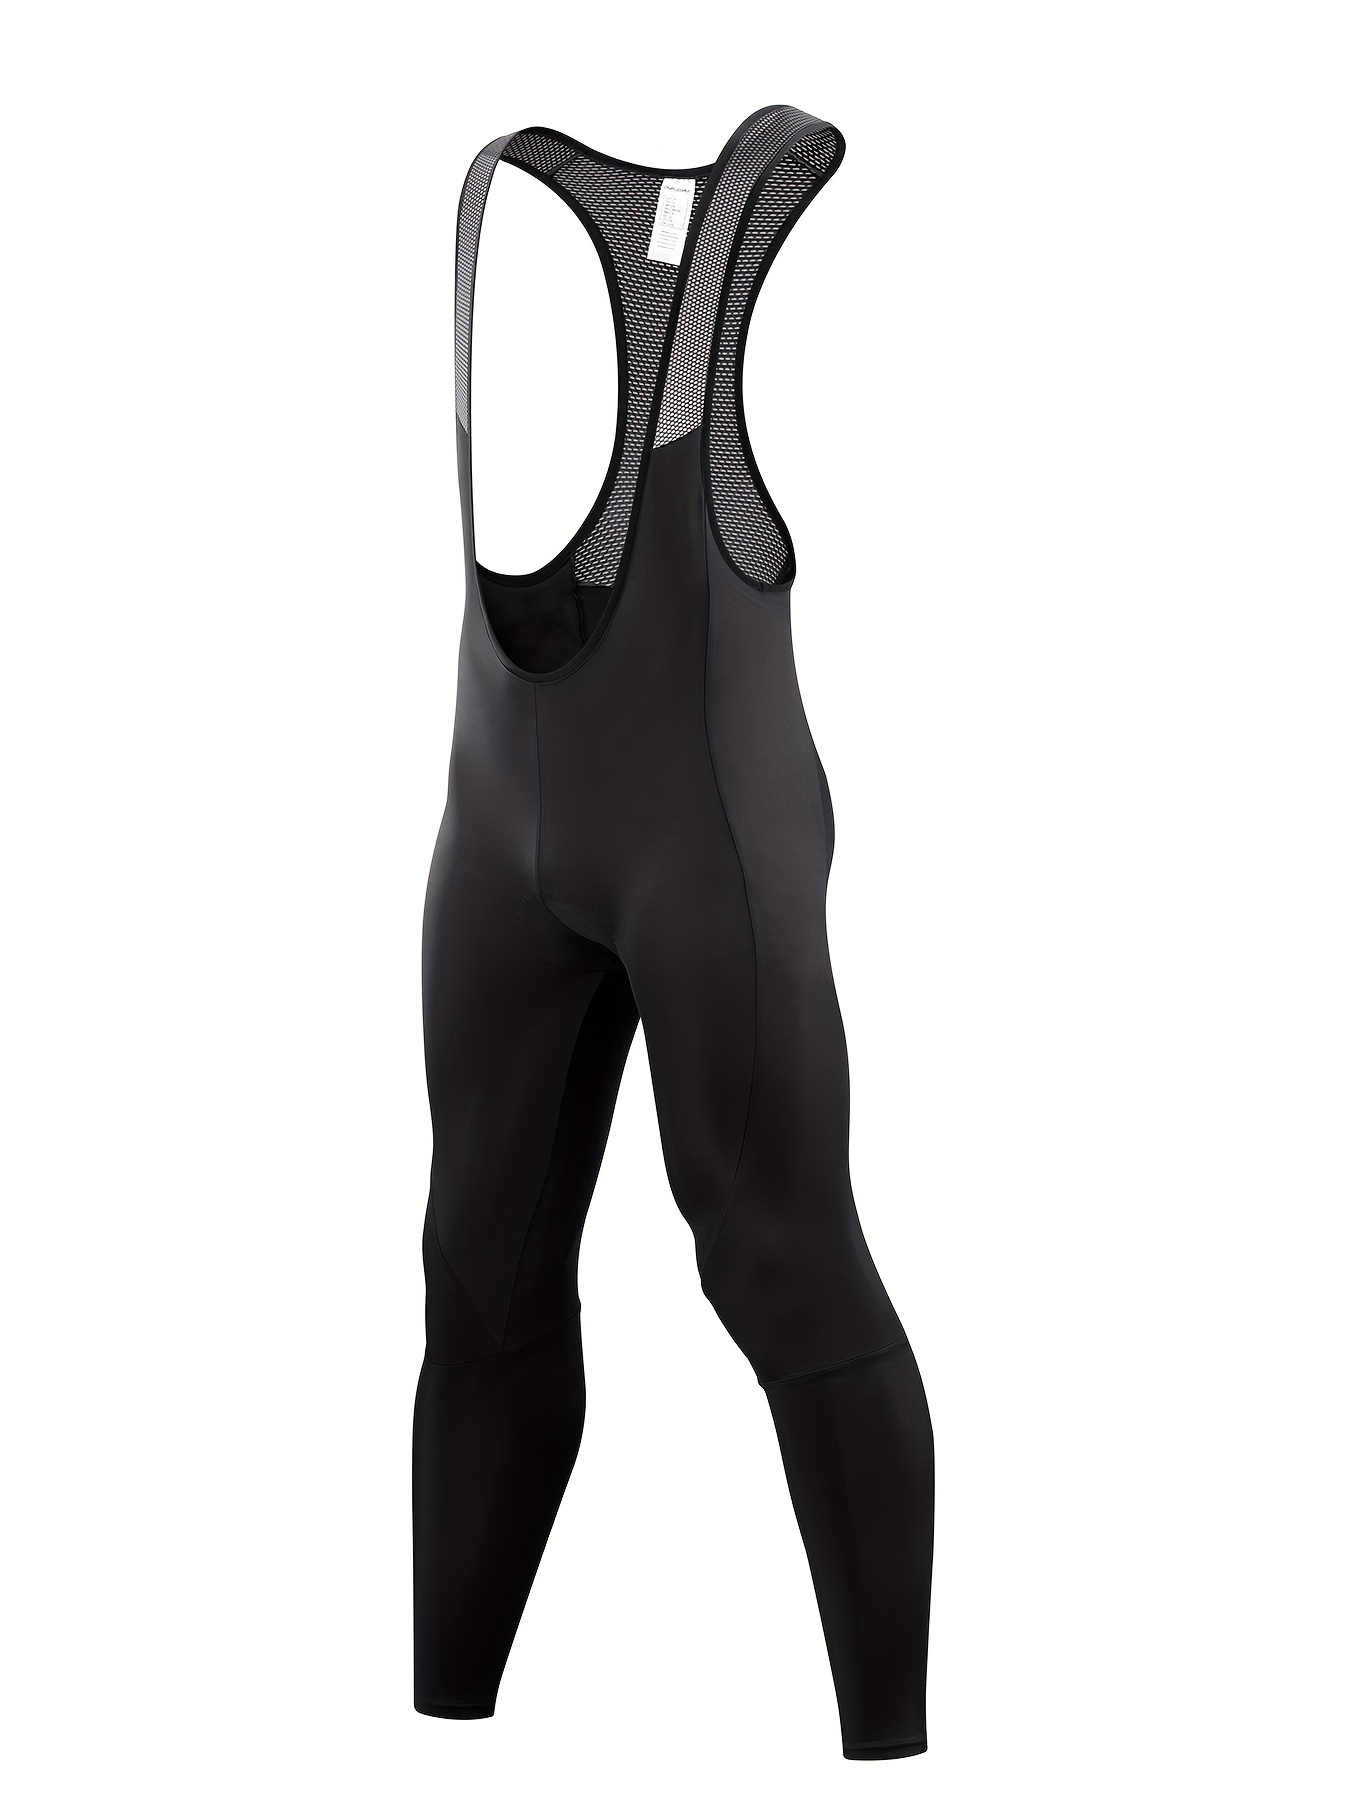 Giordana Silverline Thermal Cycling Tights w/ No Pad – Classic Cycling